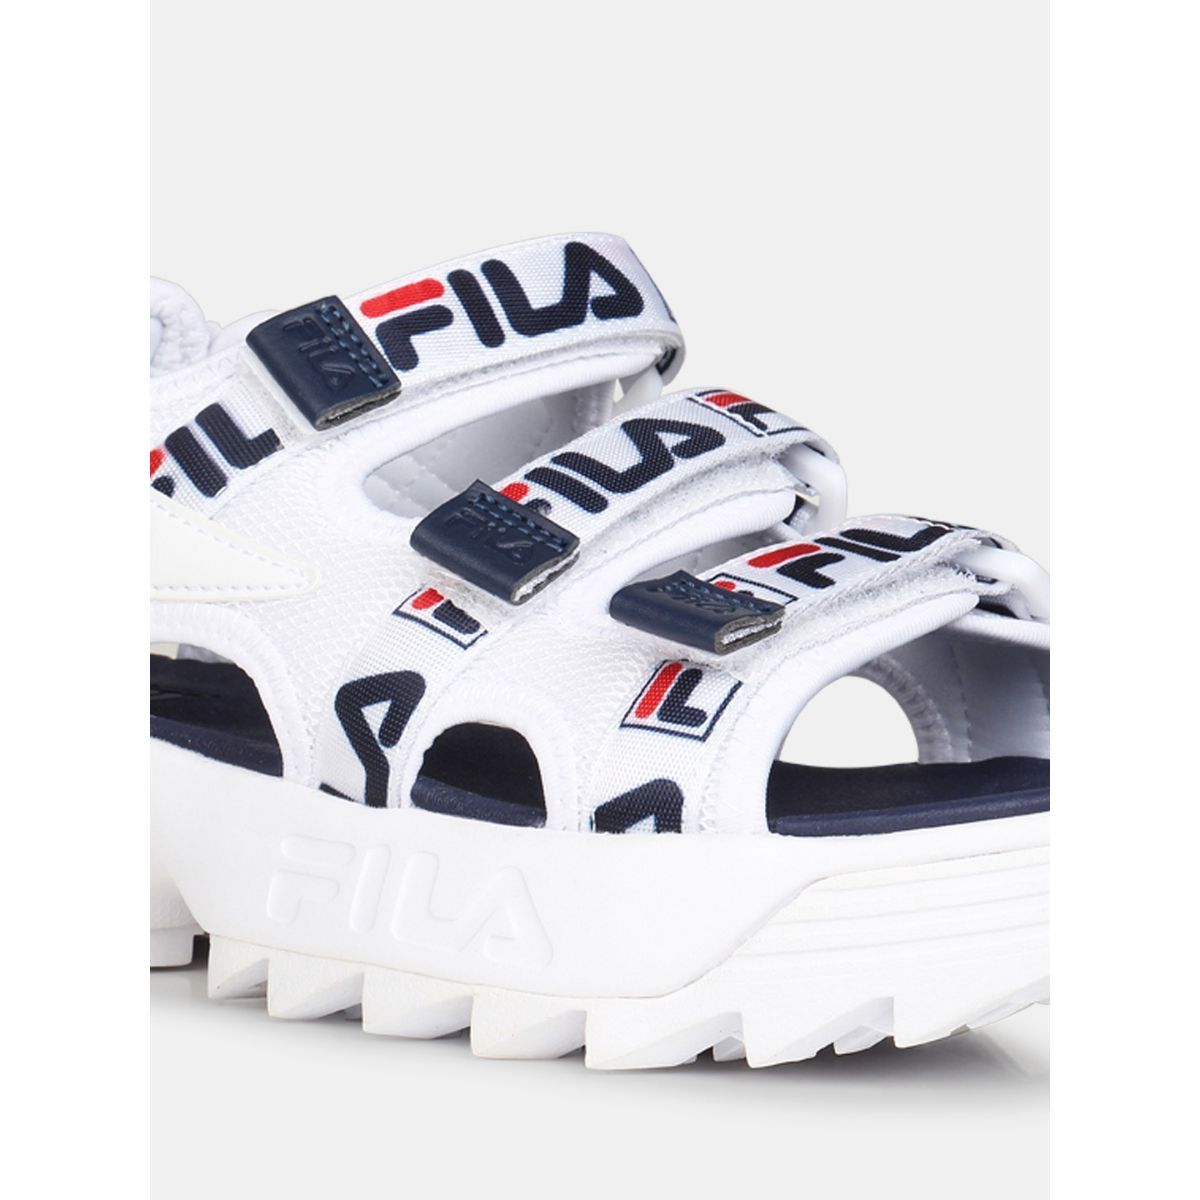 Fila Disruptor Sandals Review Hotsell  wwwillvacom 1693082078